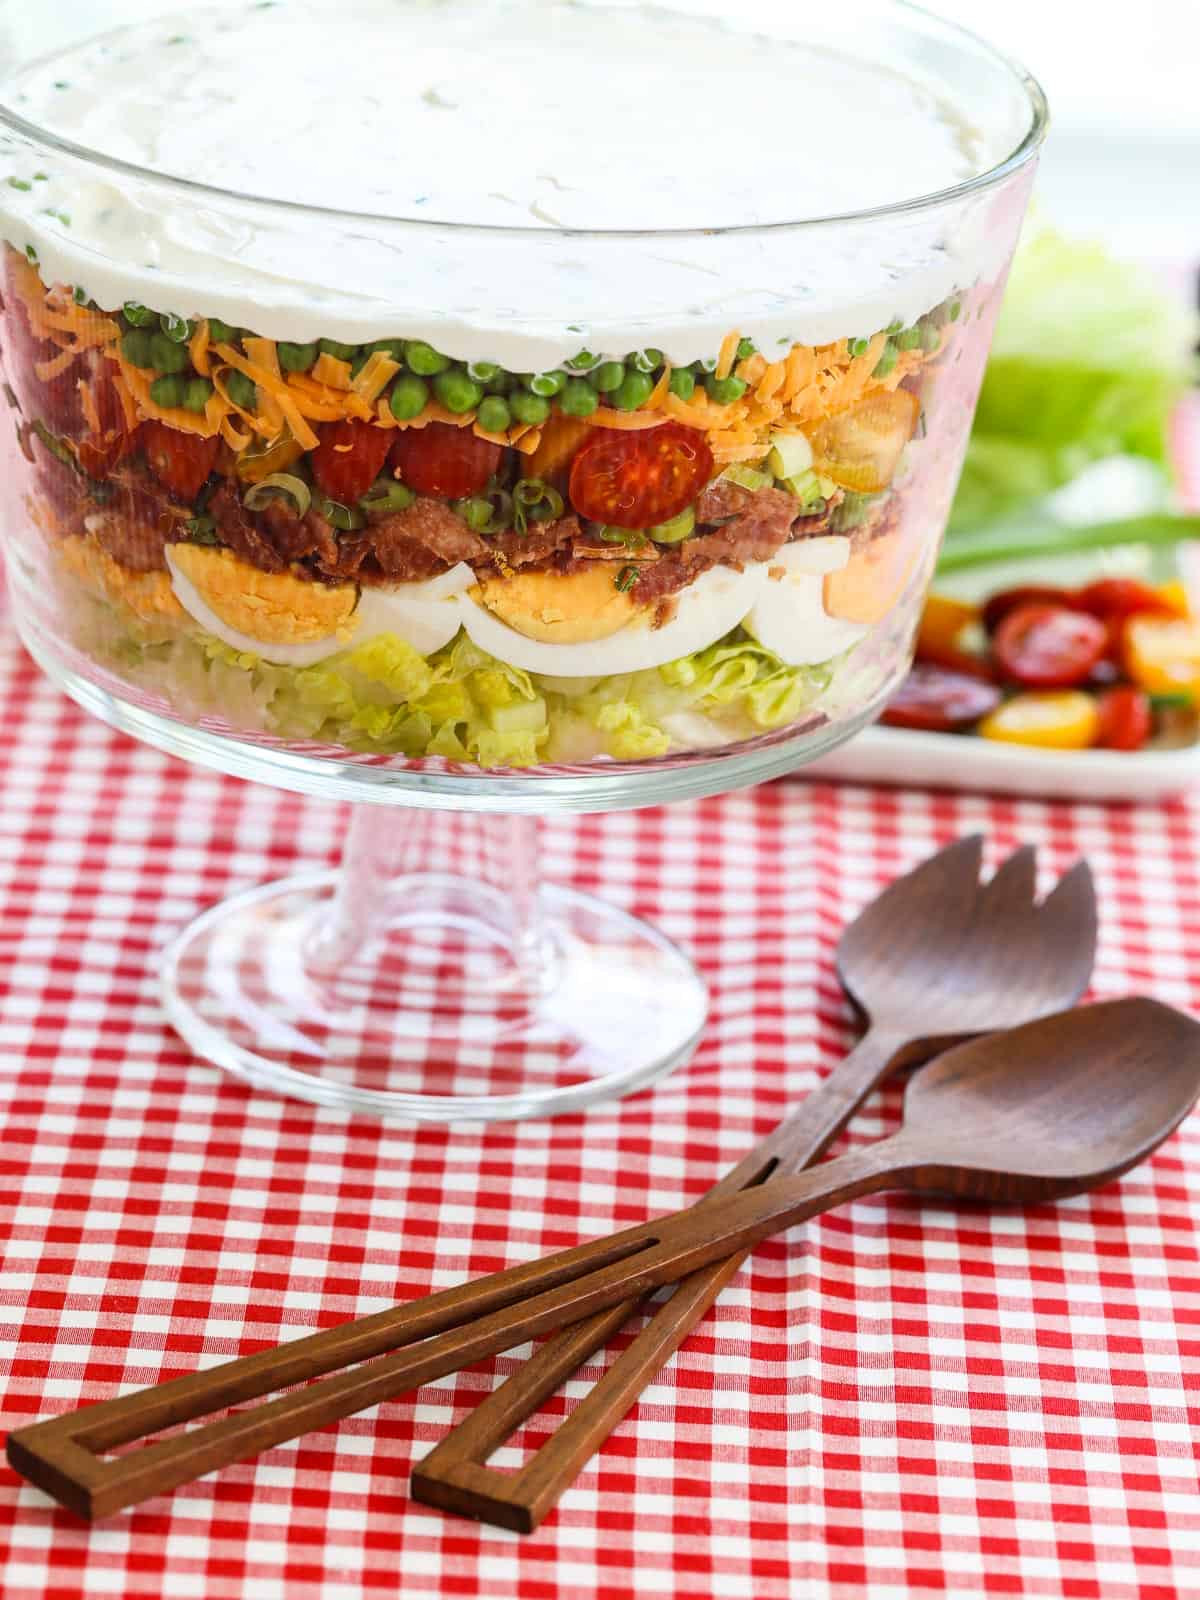 https://www.delicioustable.com/wp-content/uploads/2021/04/7-Layer-Salad-in-trifle-bowl.jpg